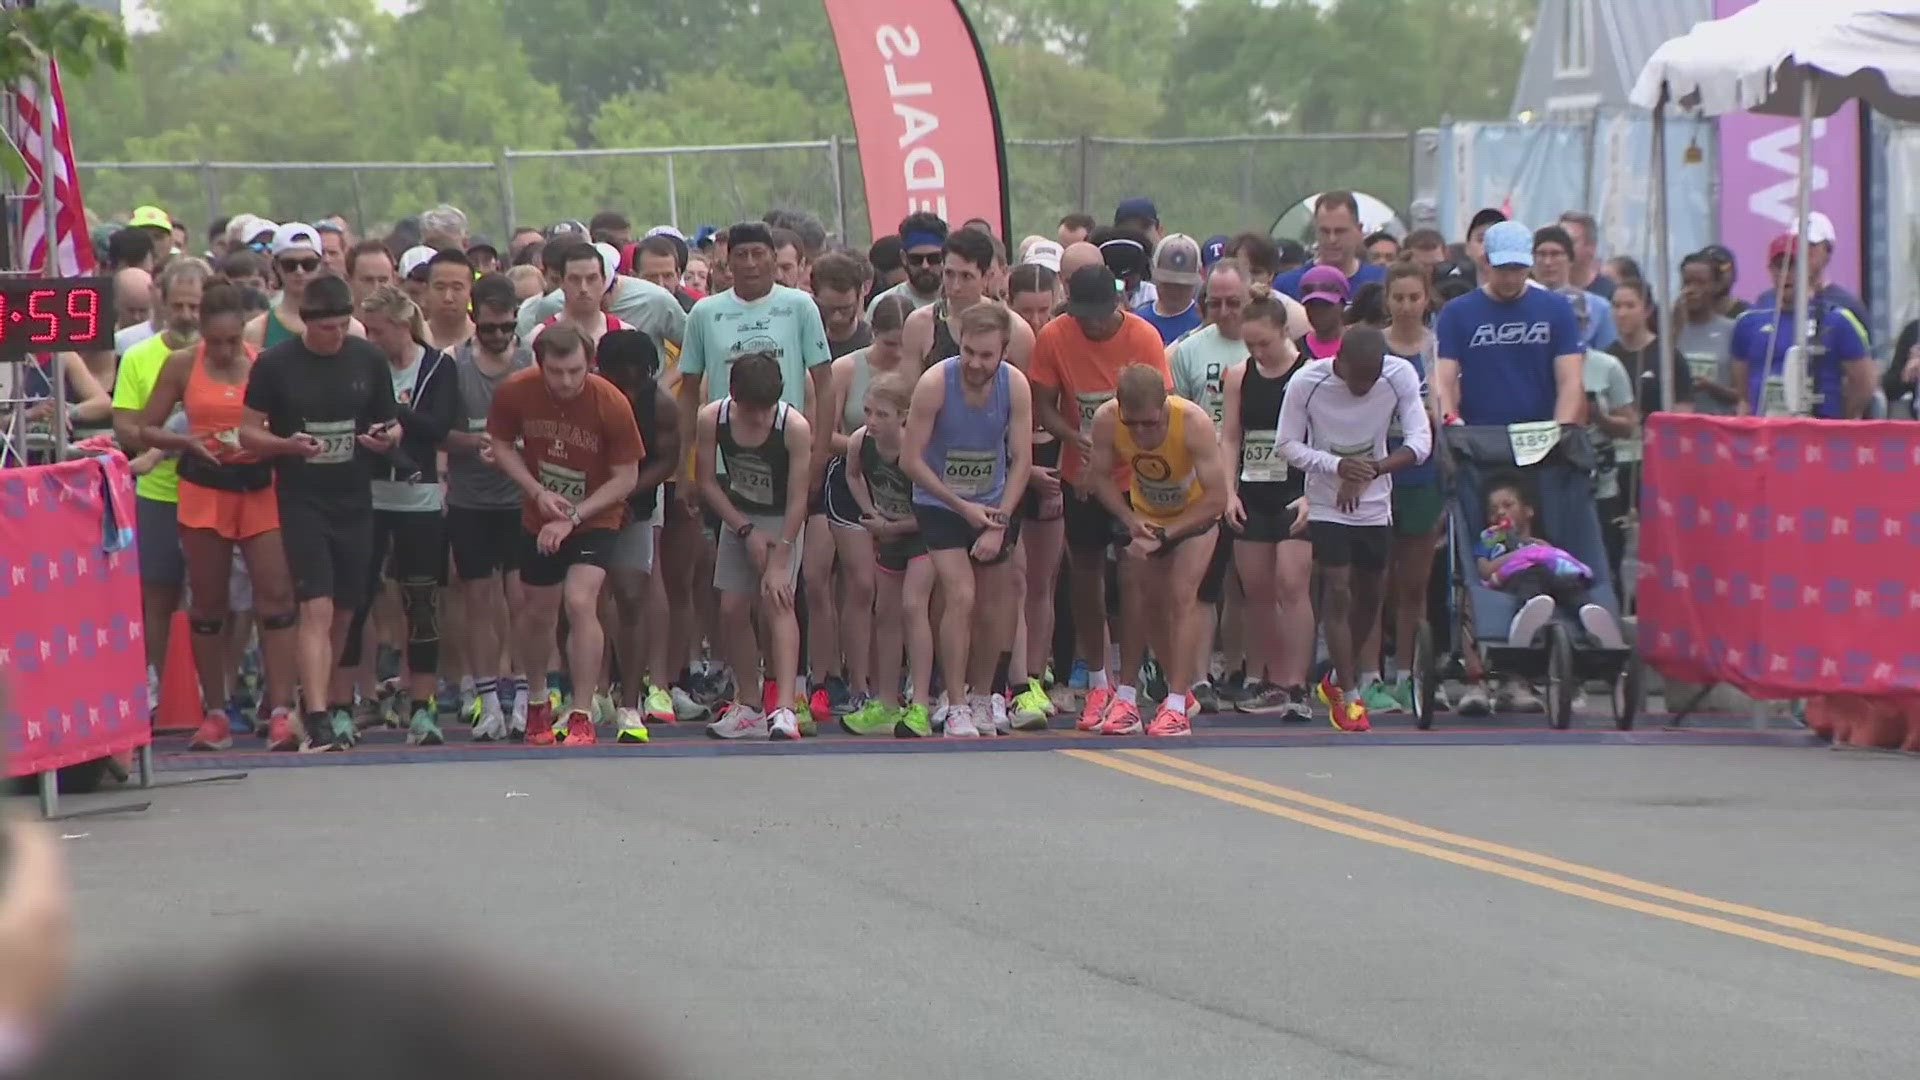 More than 7500 people hit the pavement in Alexandria as the Parkway Classic celebrates 40 years of running and raising money for charity.